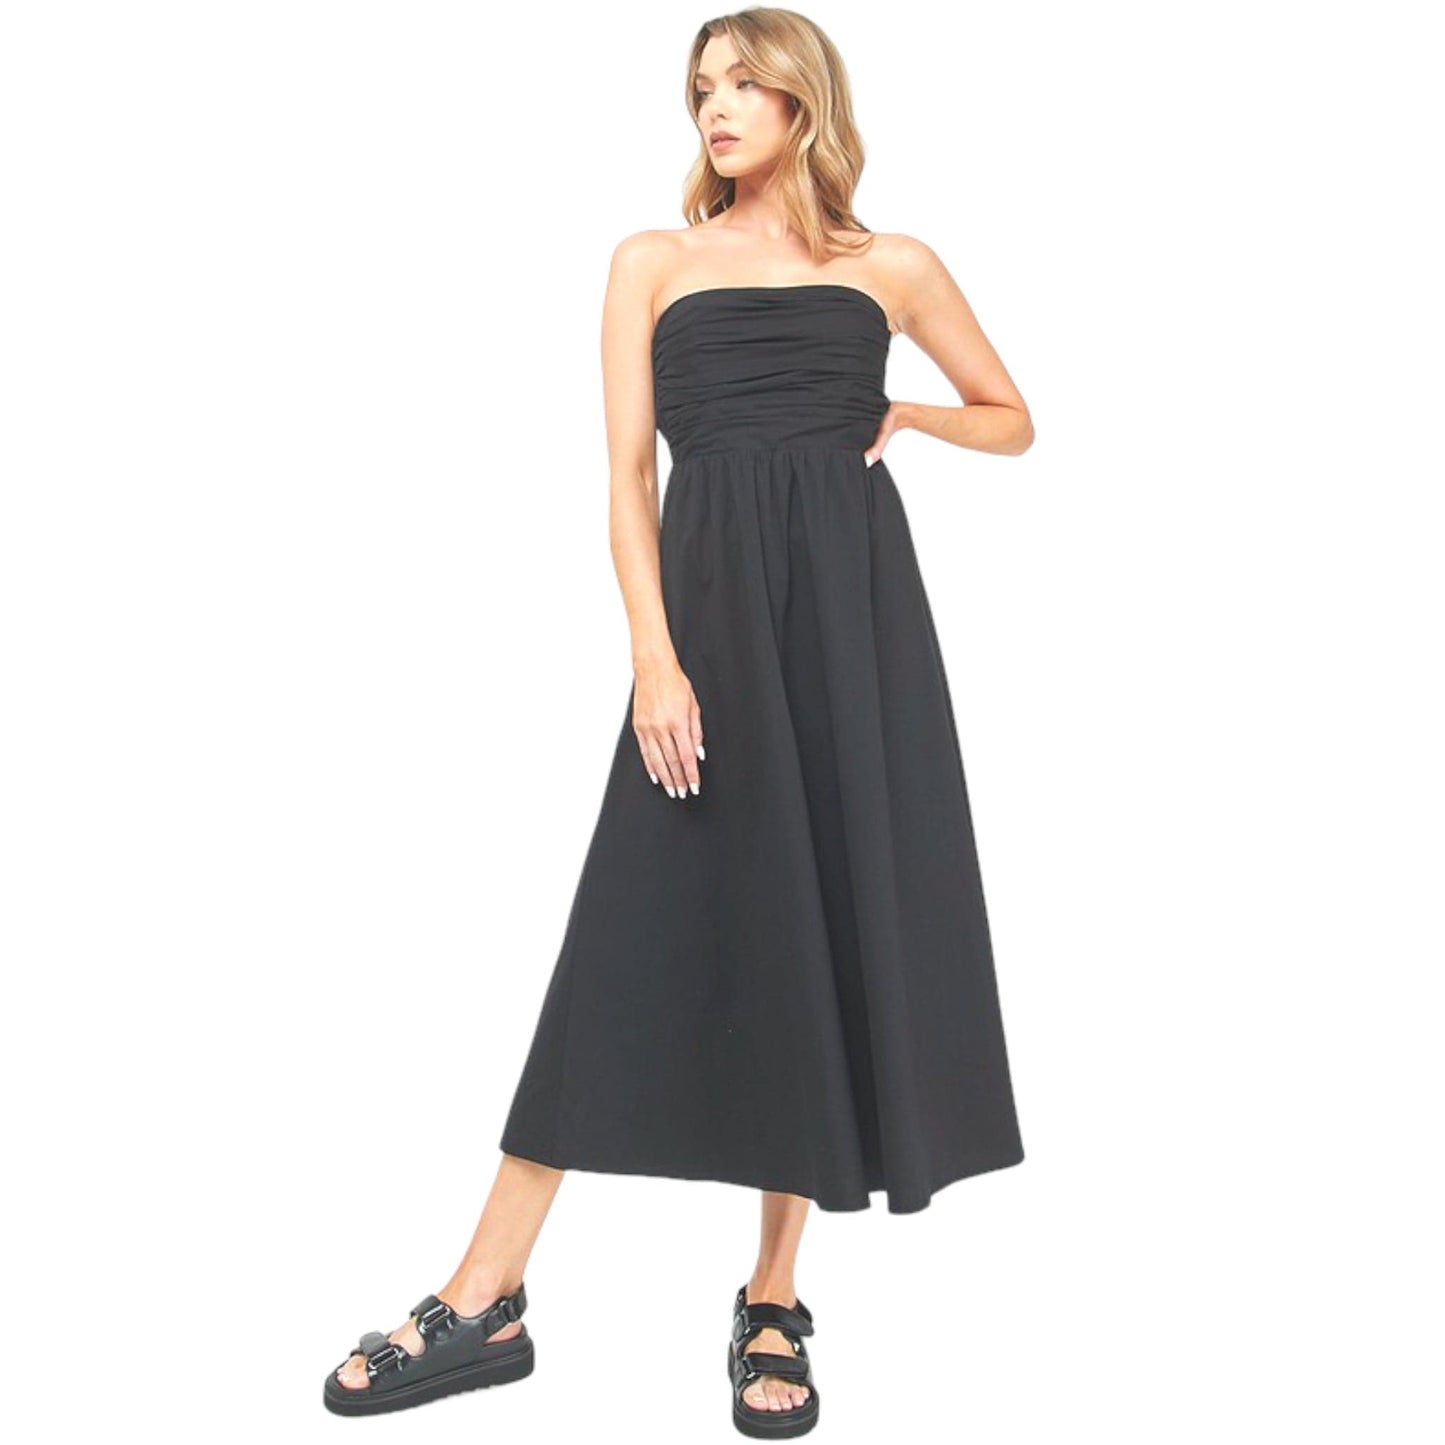 Strapless Maxi Dress in Black and White